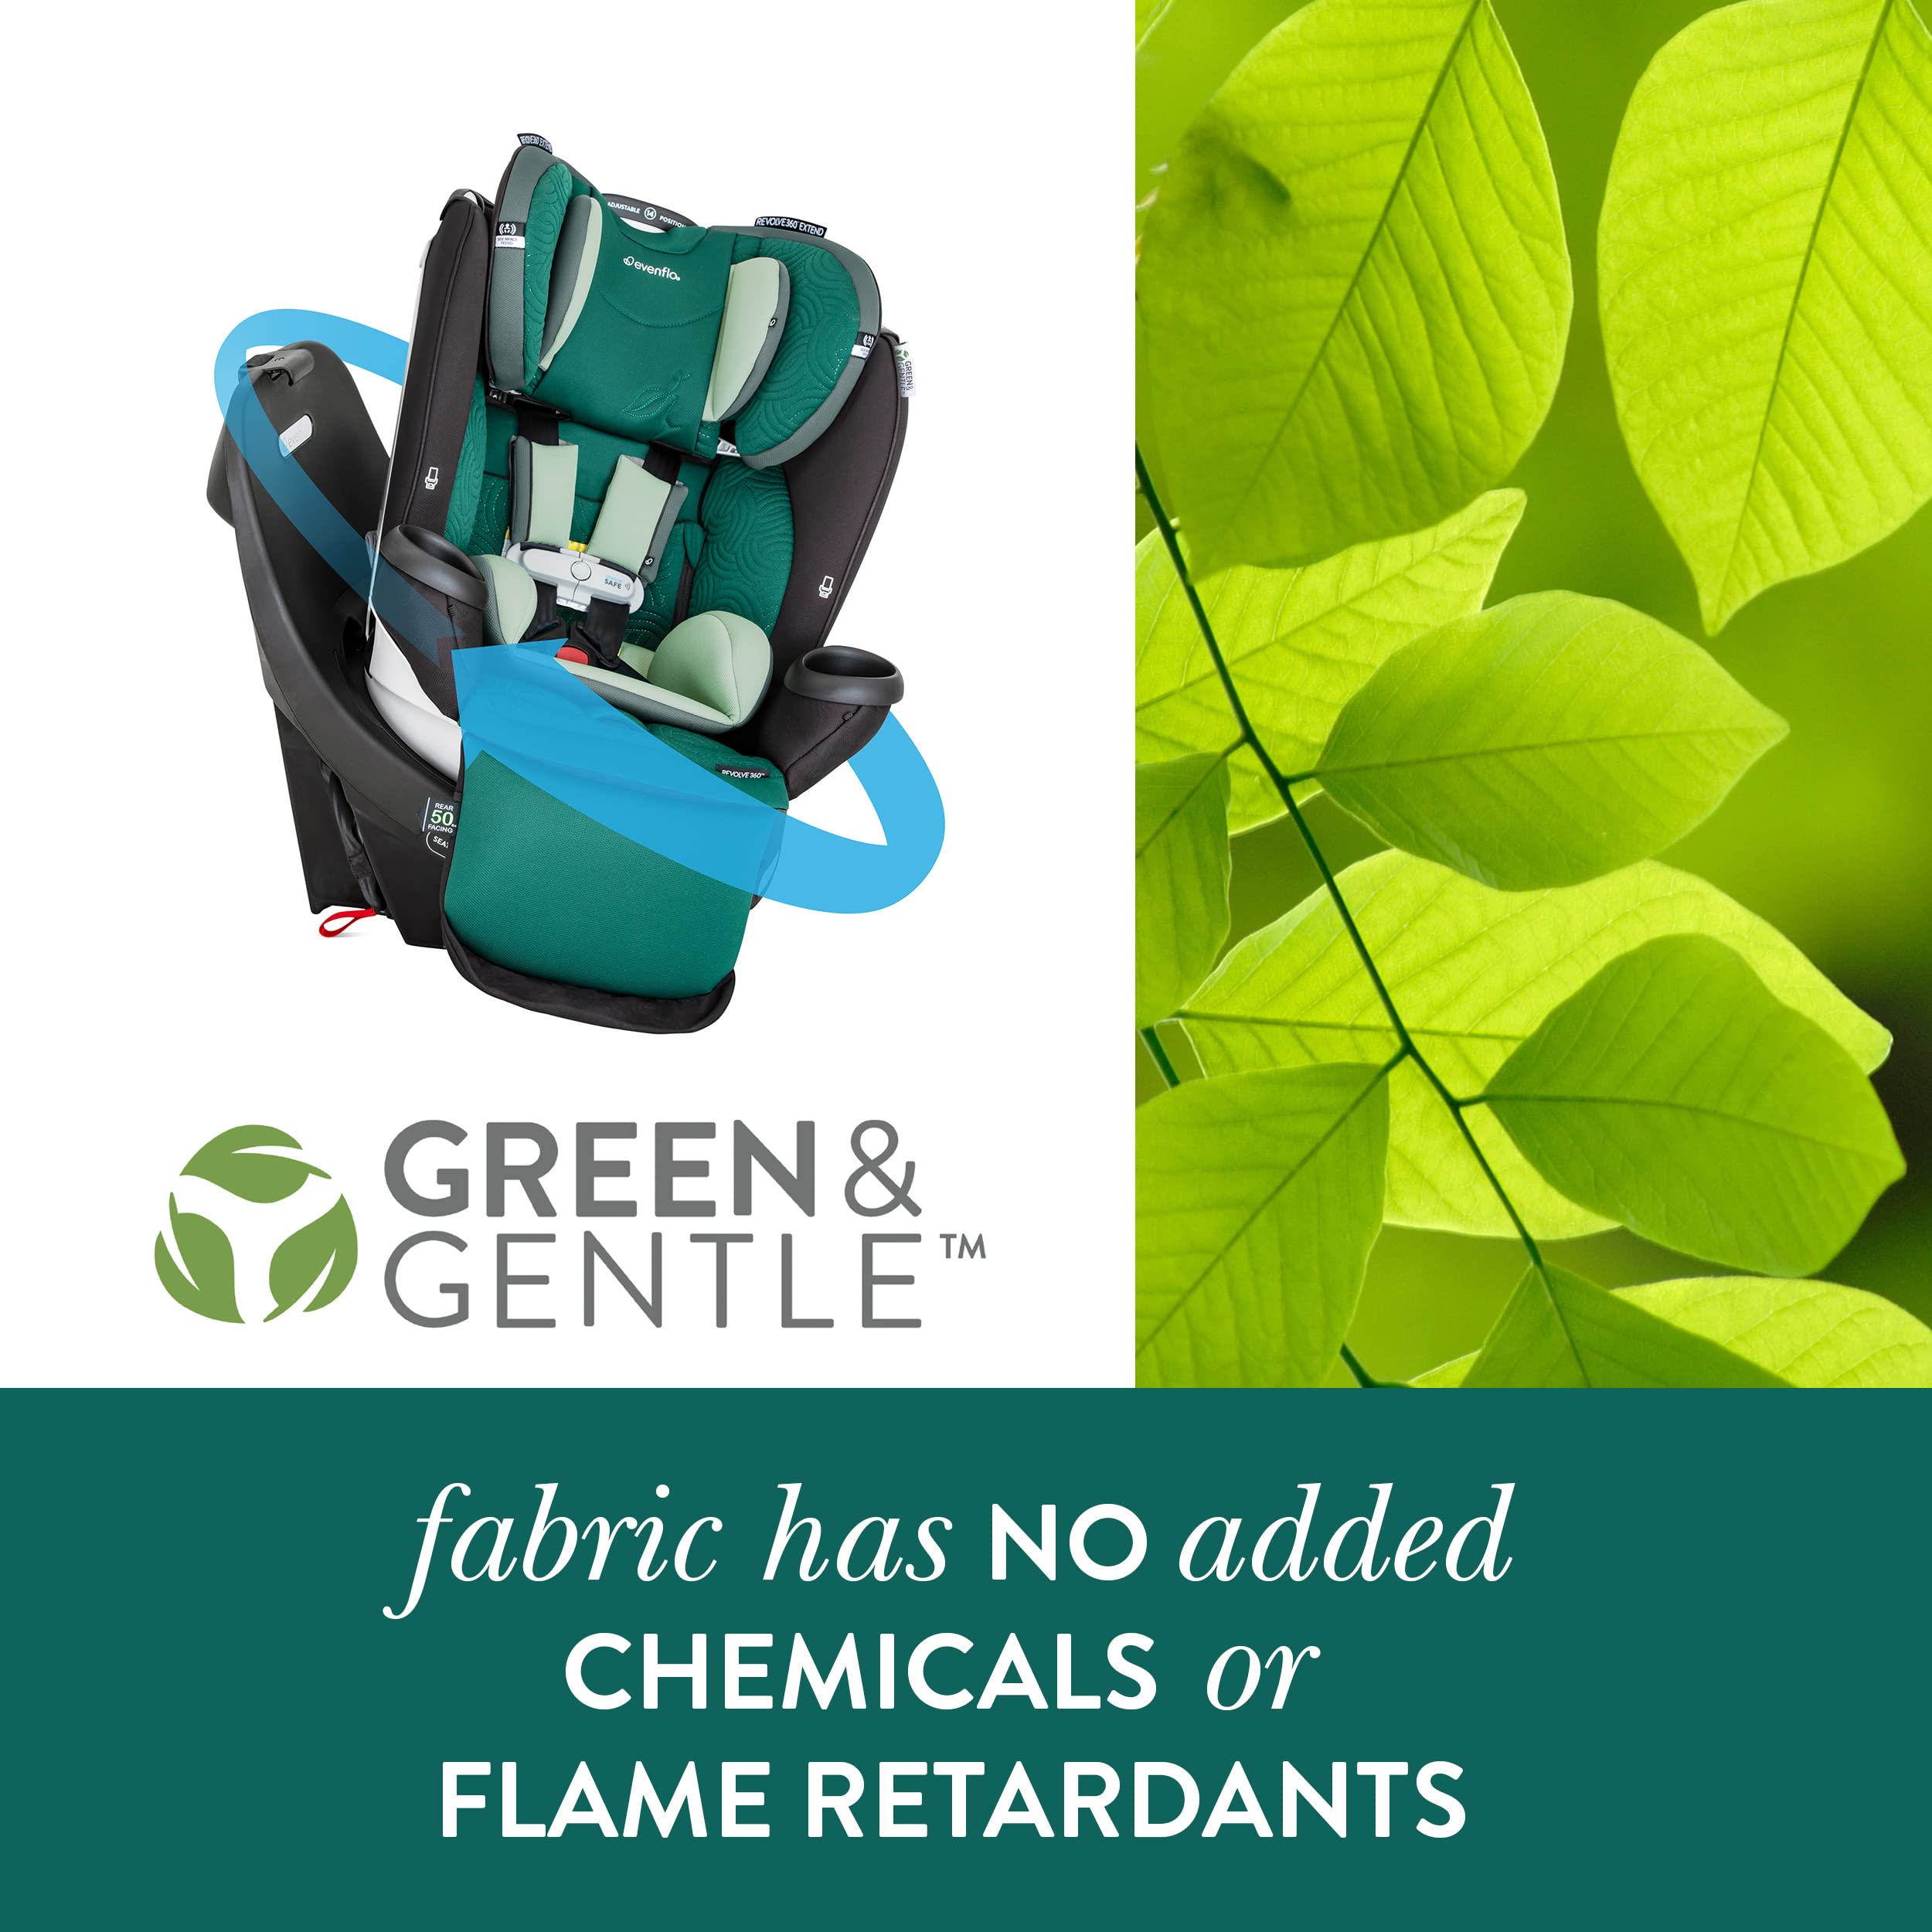 Evenflo Gold Revolve360 Extend All-in-One Rotational Car Seat with Green & Gentle Fabric (Emerald Green)